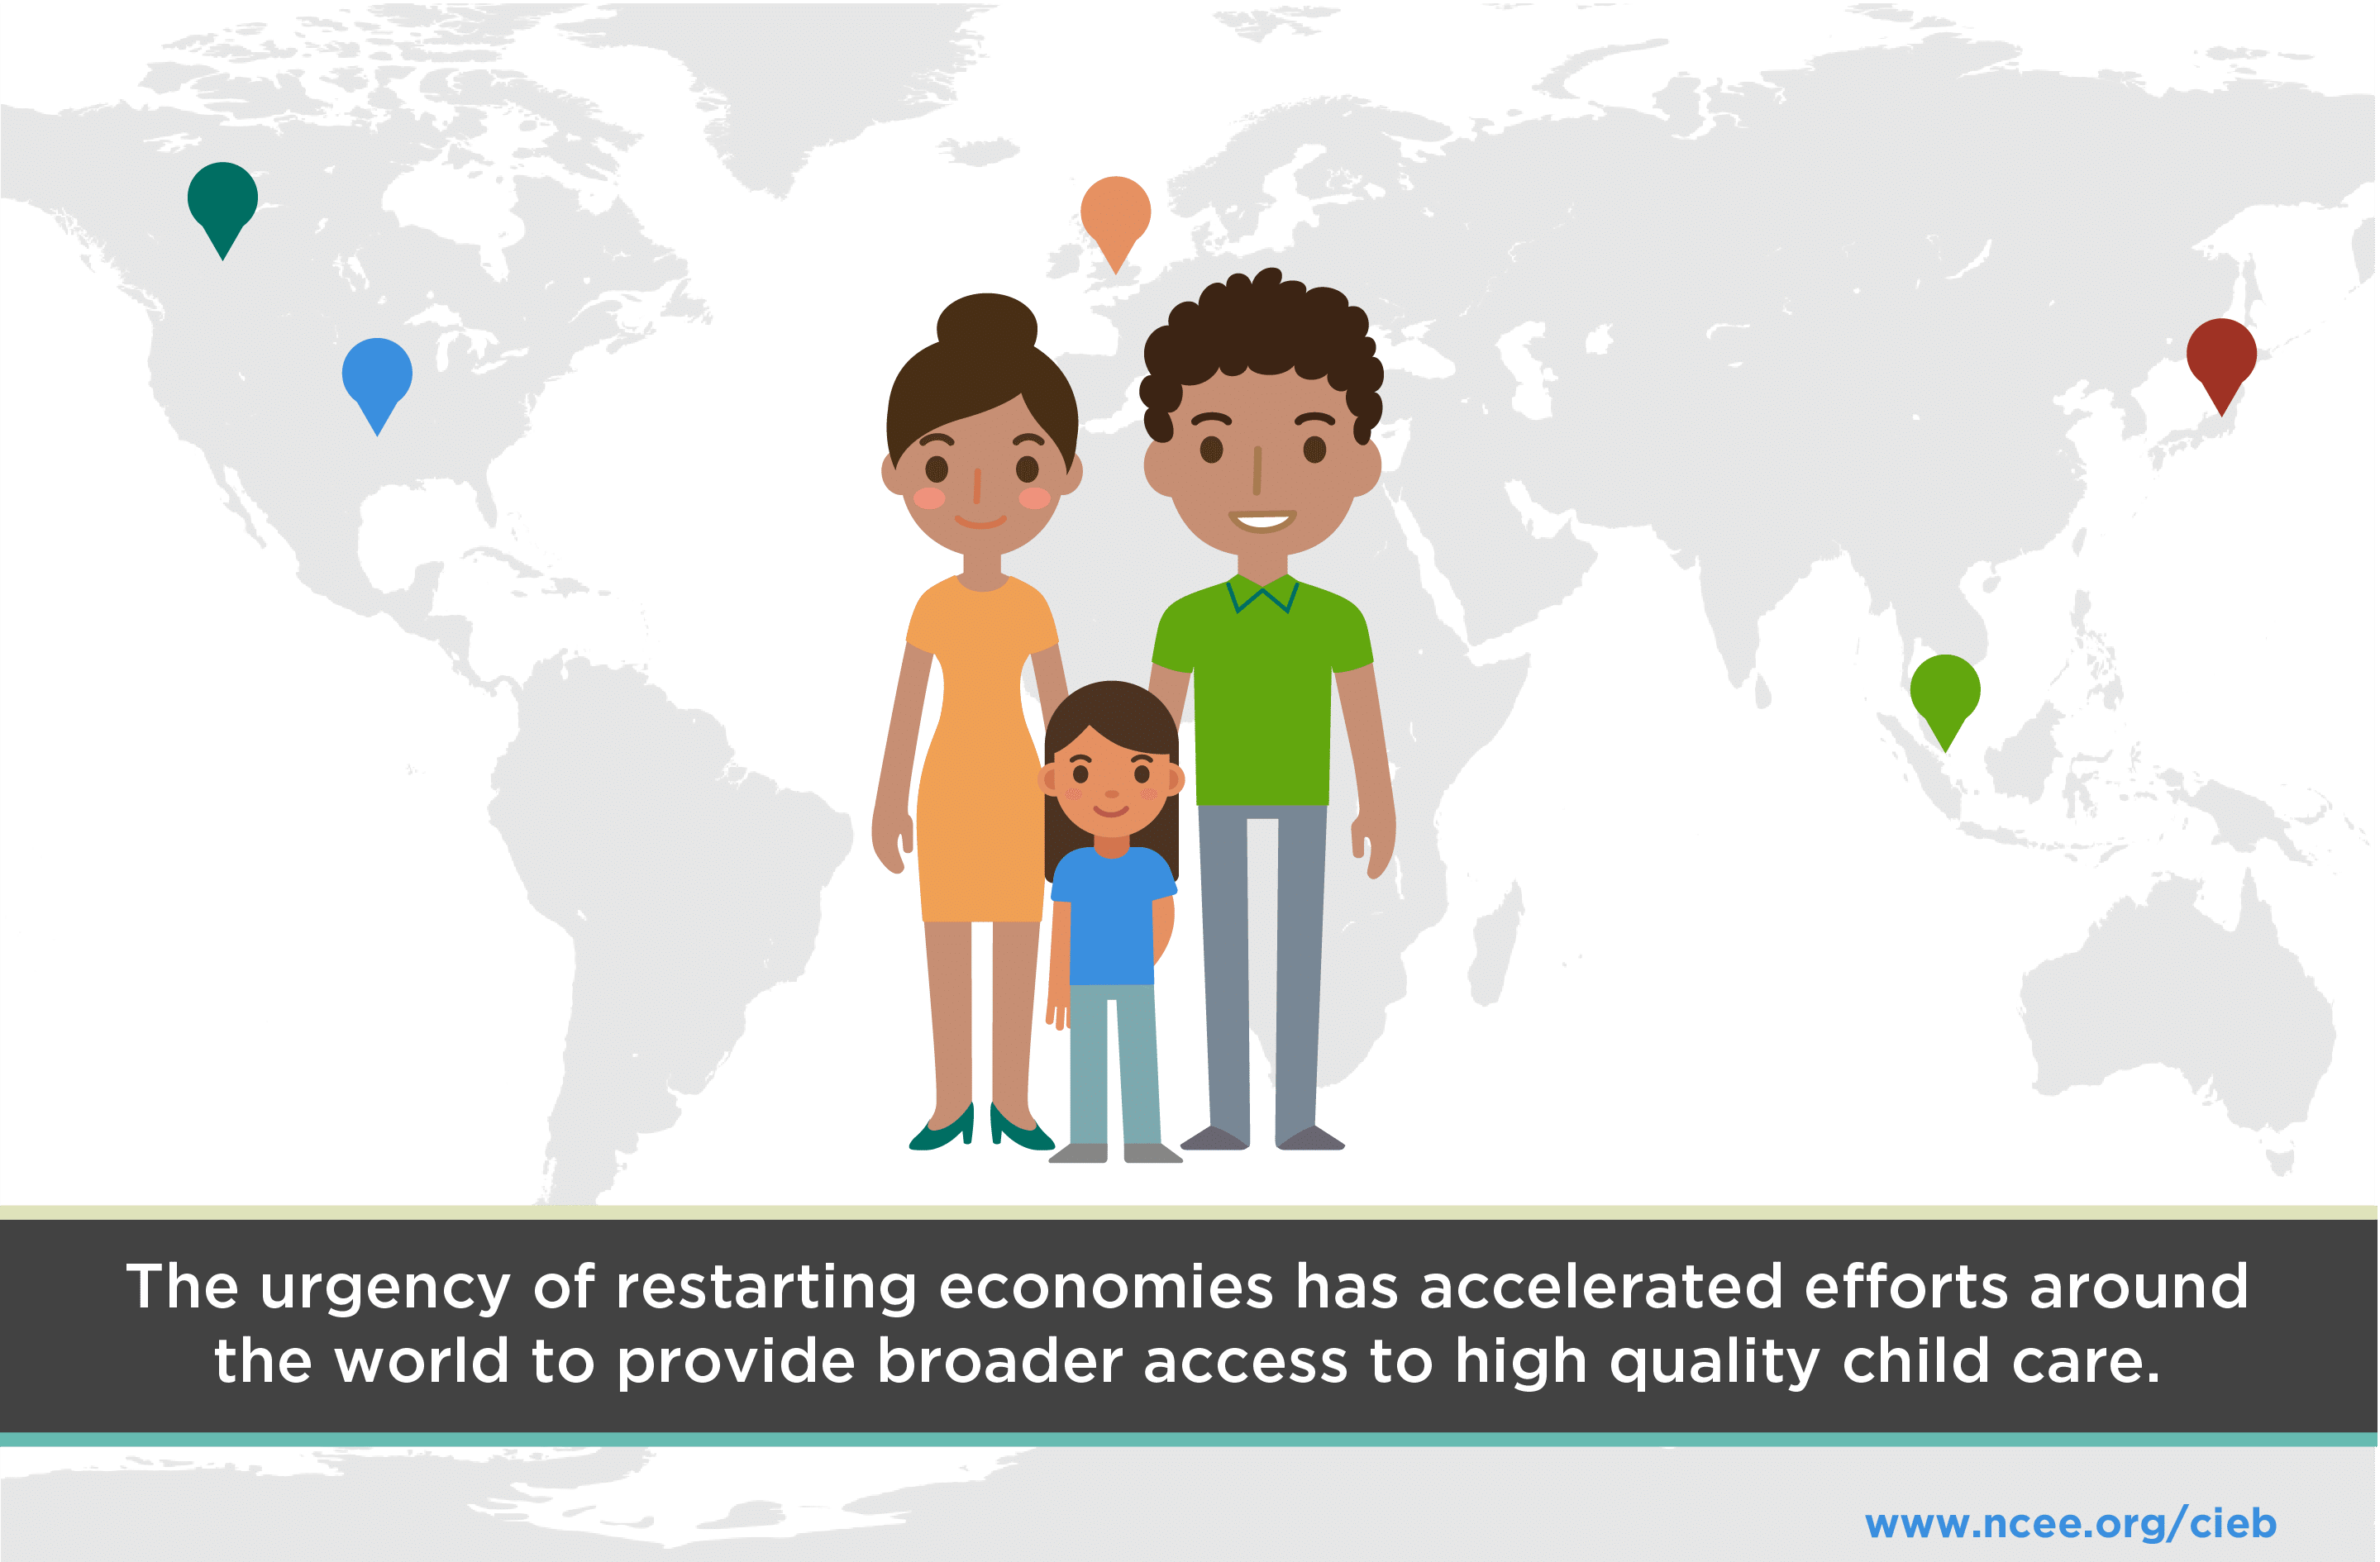 The urgency of restarting economies has accelerated efforts around the world to provide broader access to high quality child care.